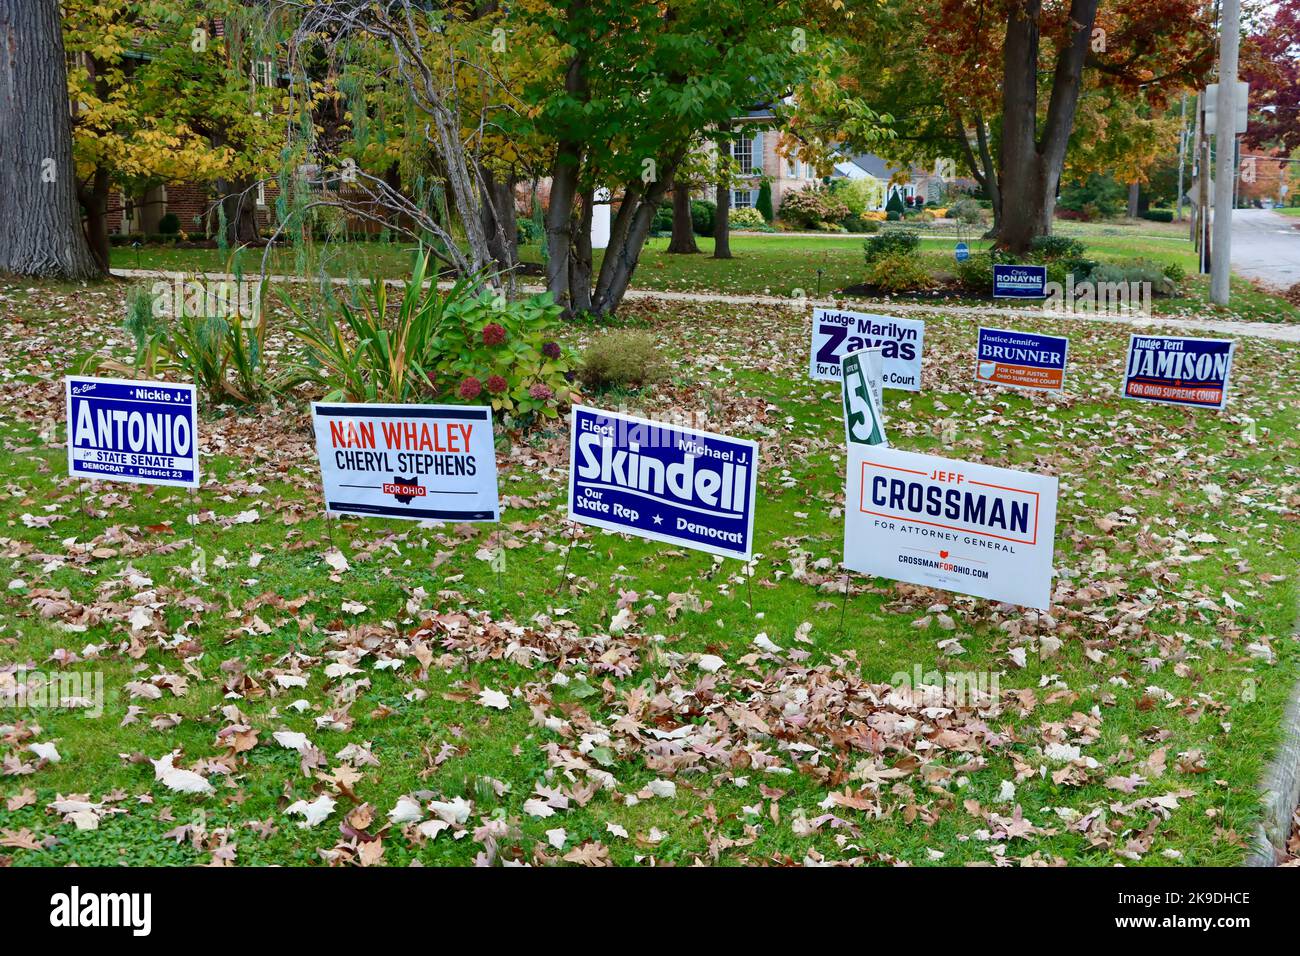 Front lawn adds for 2022 mid-term elections in Lakewood, Ohio Stock Photo